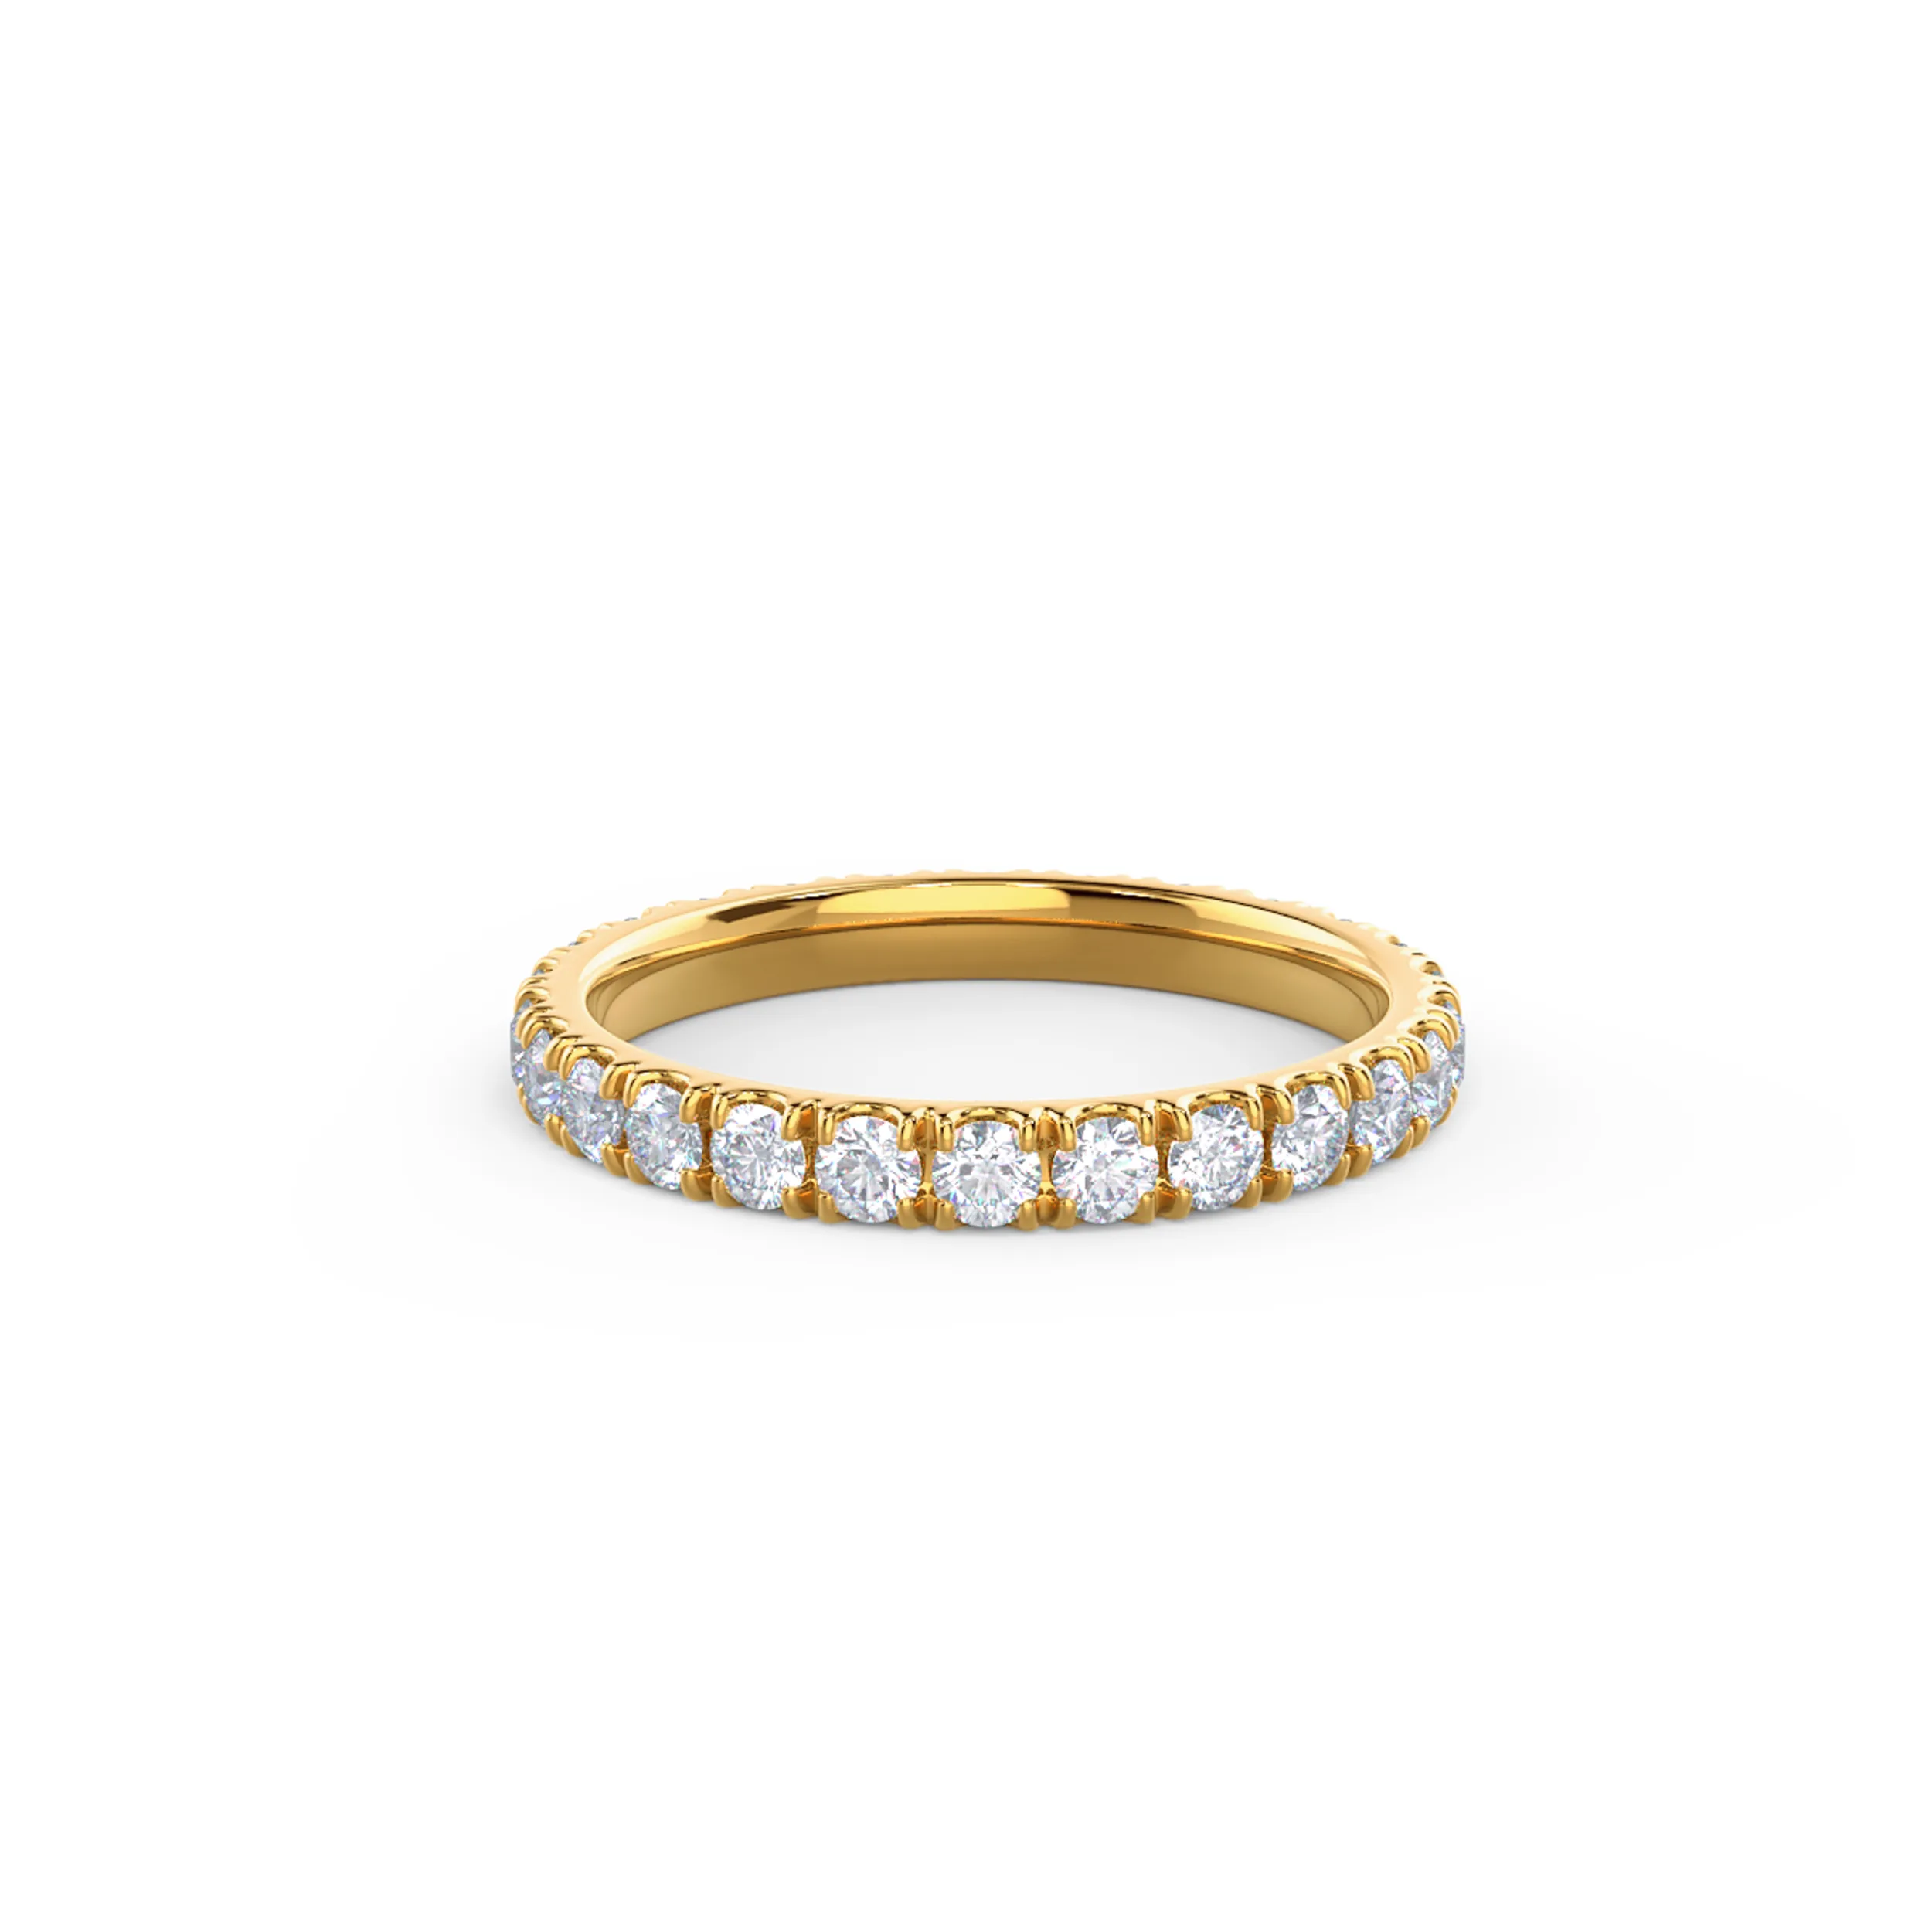 14k Yellow Gold U Pavé Eternity Band featuring High Quality 1.0 ct Round Synthetic Diamonds (Main View)